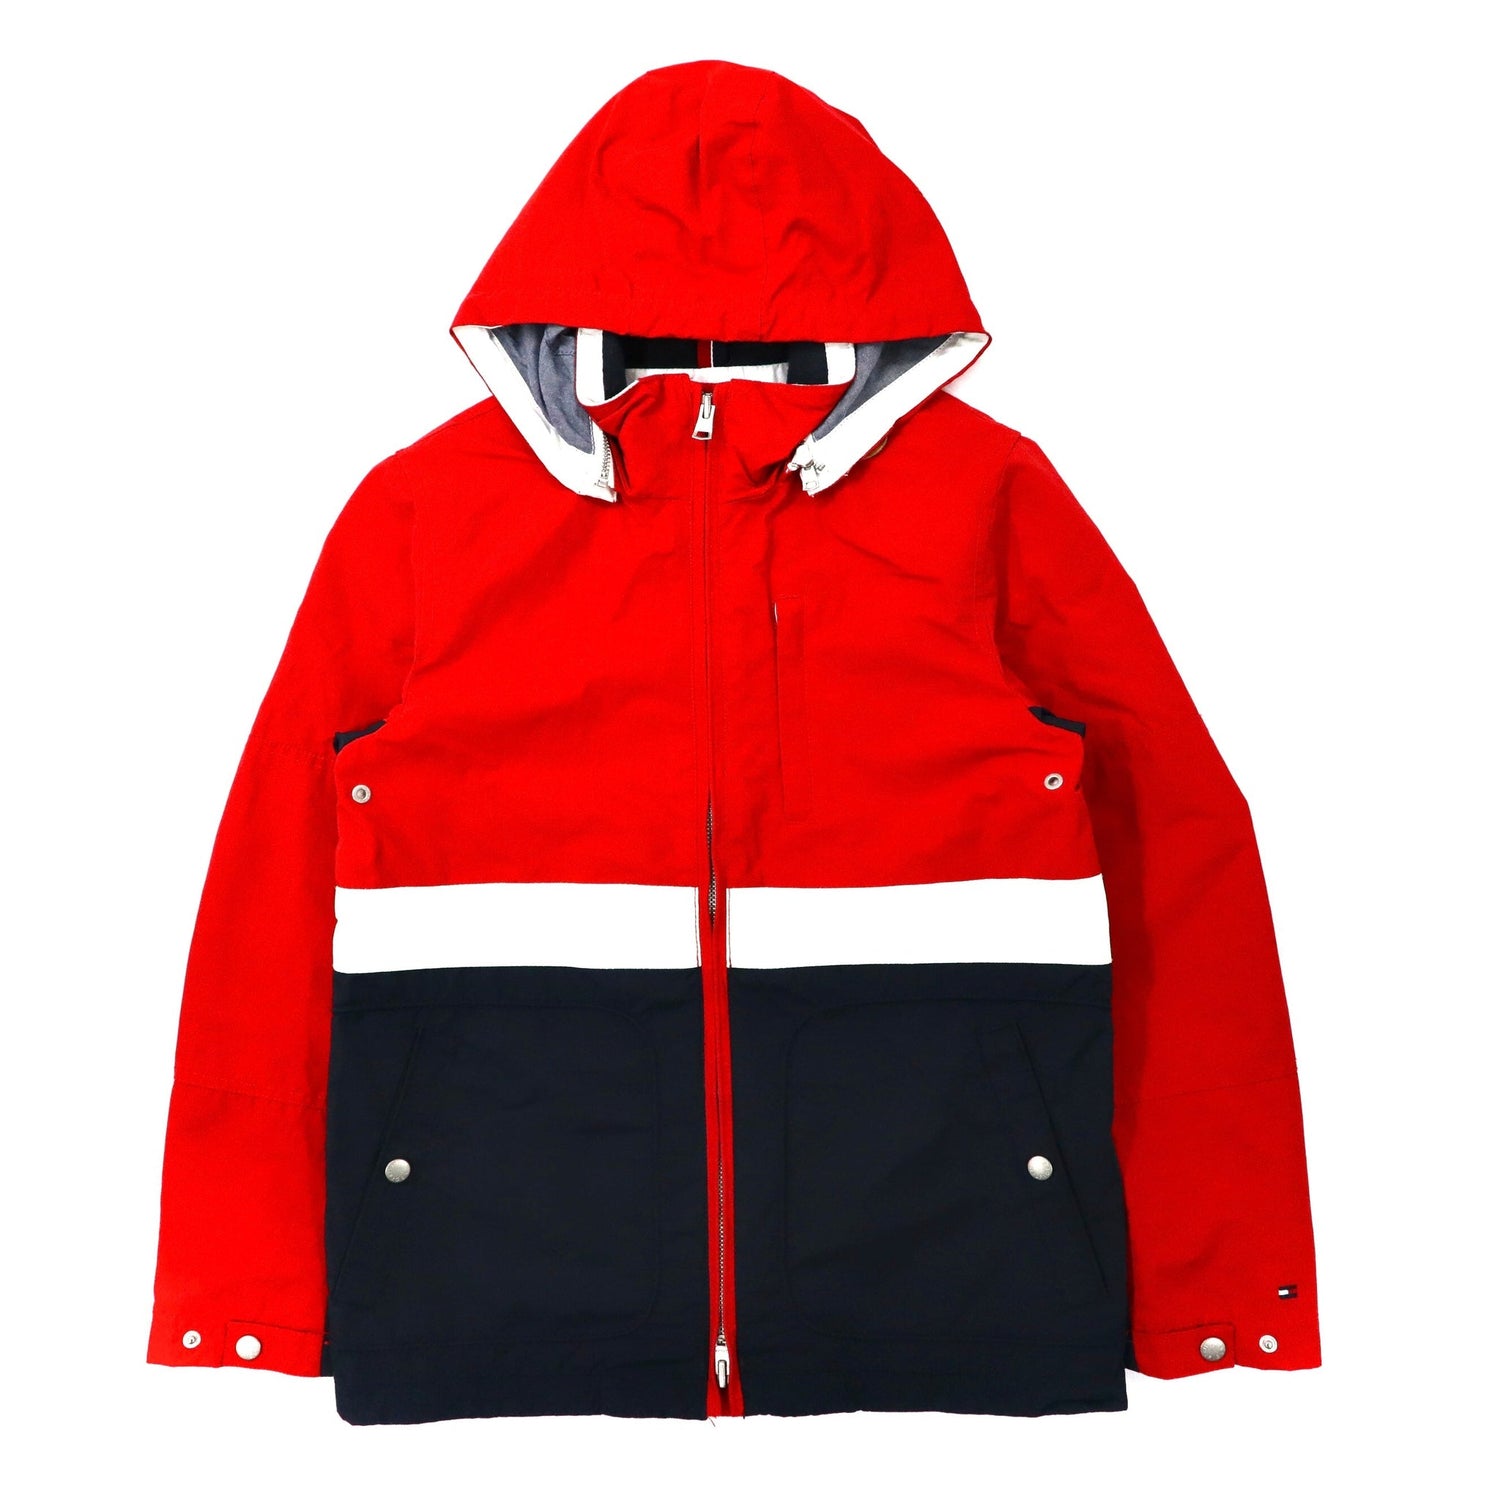 TOMMY HILFIGER Sailing Jacket M Red Tricolor Color Nylon Hoodie